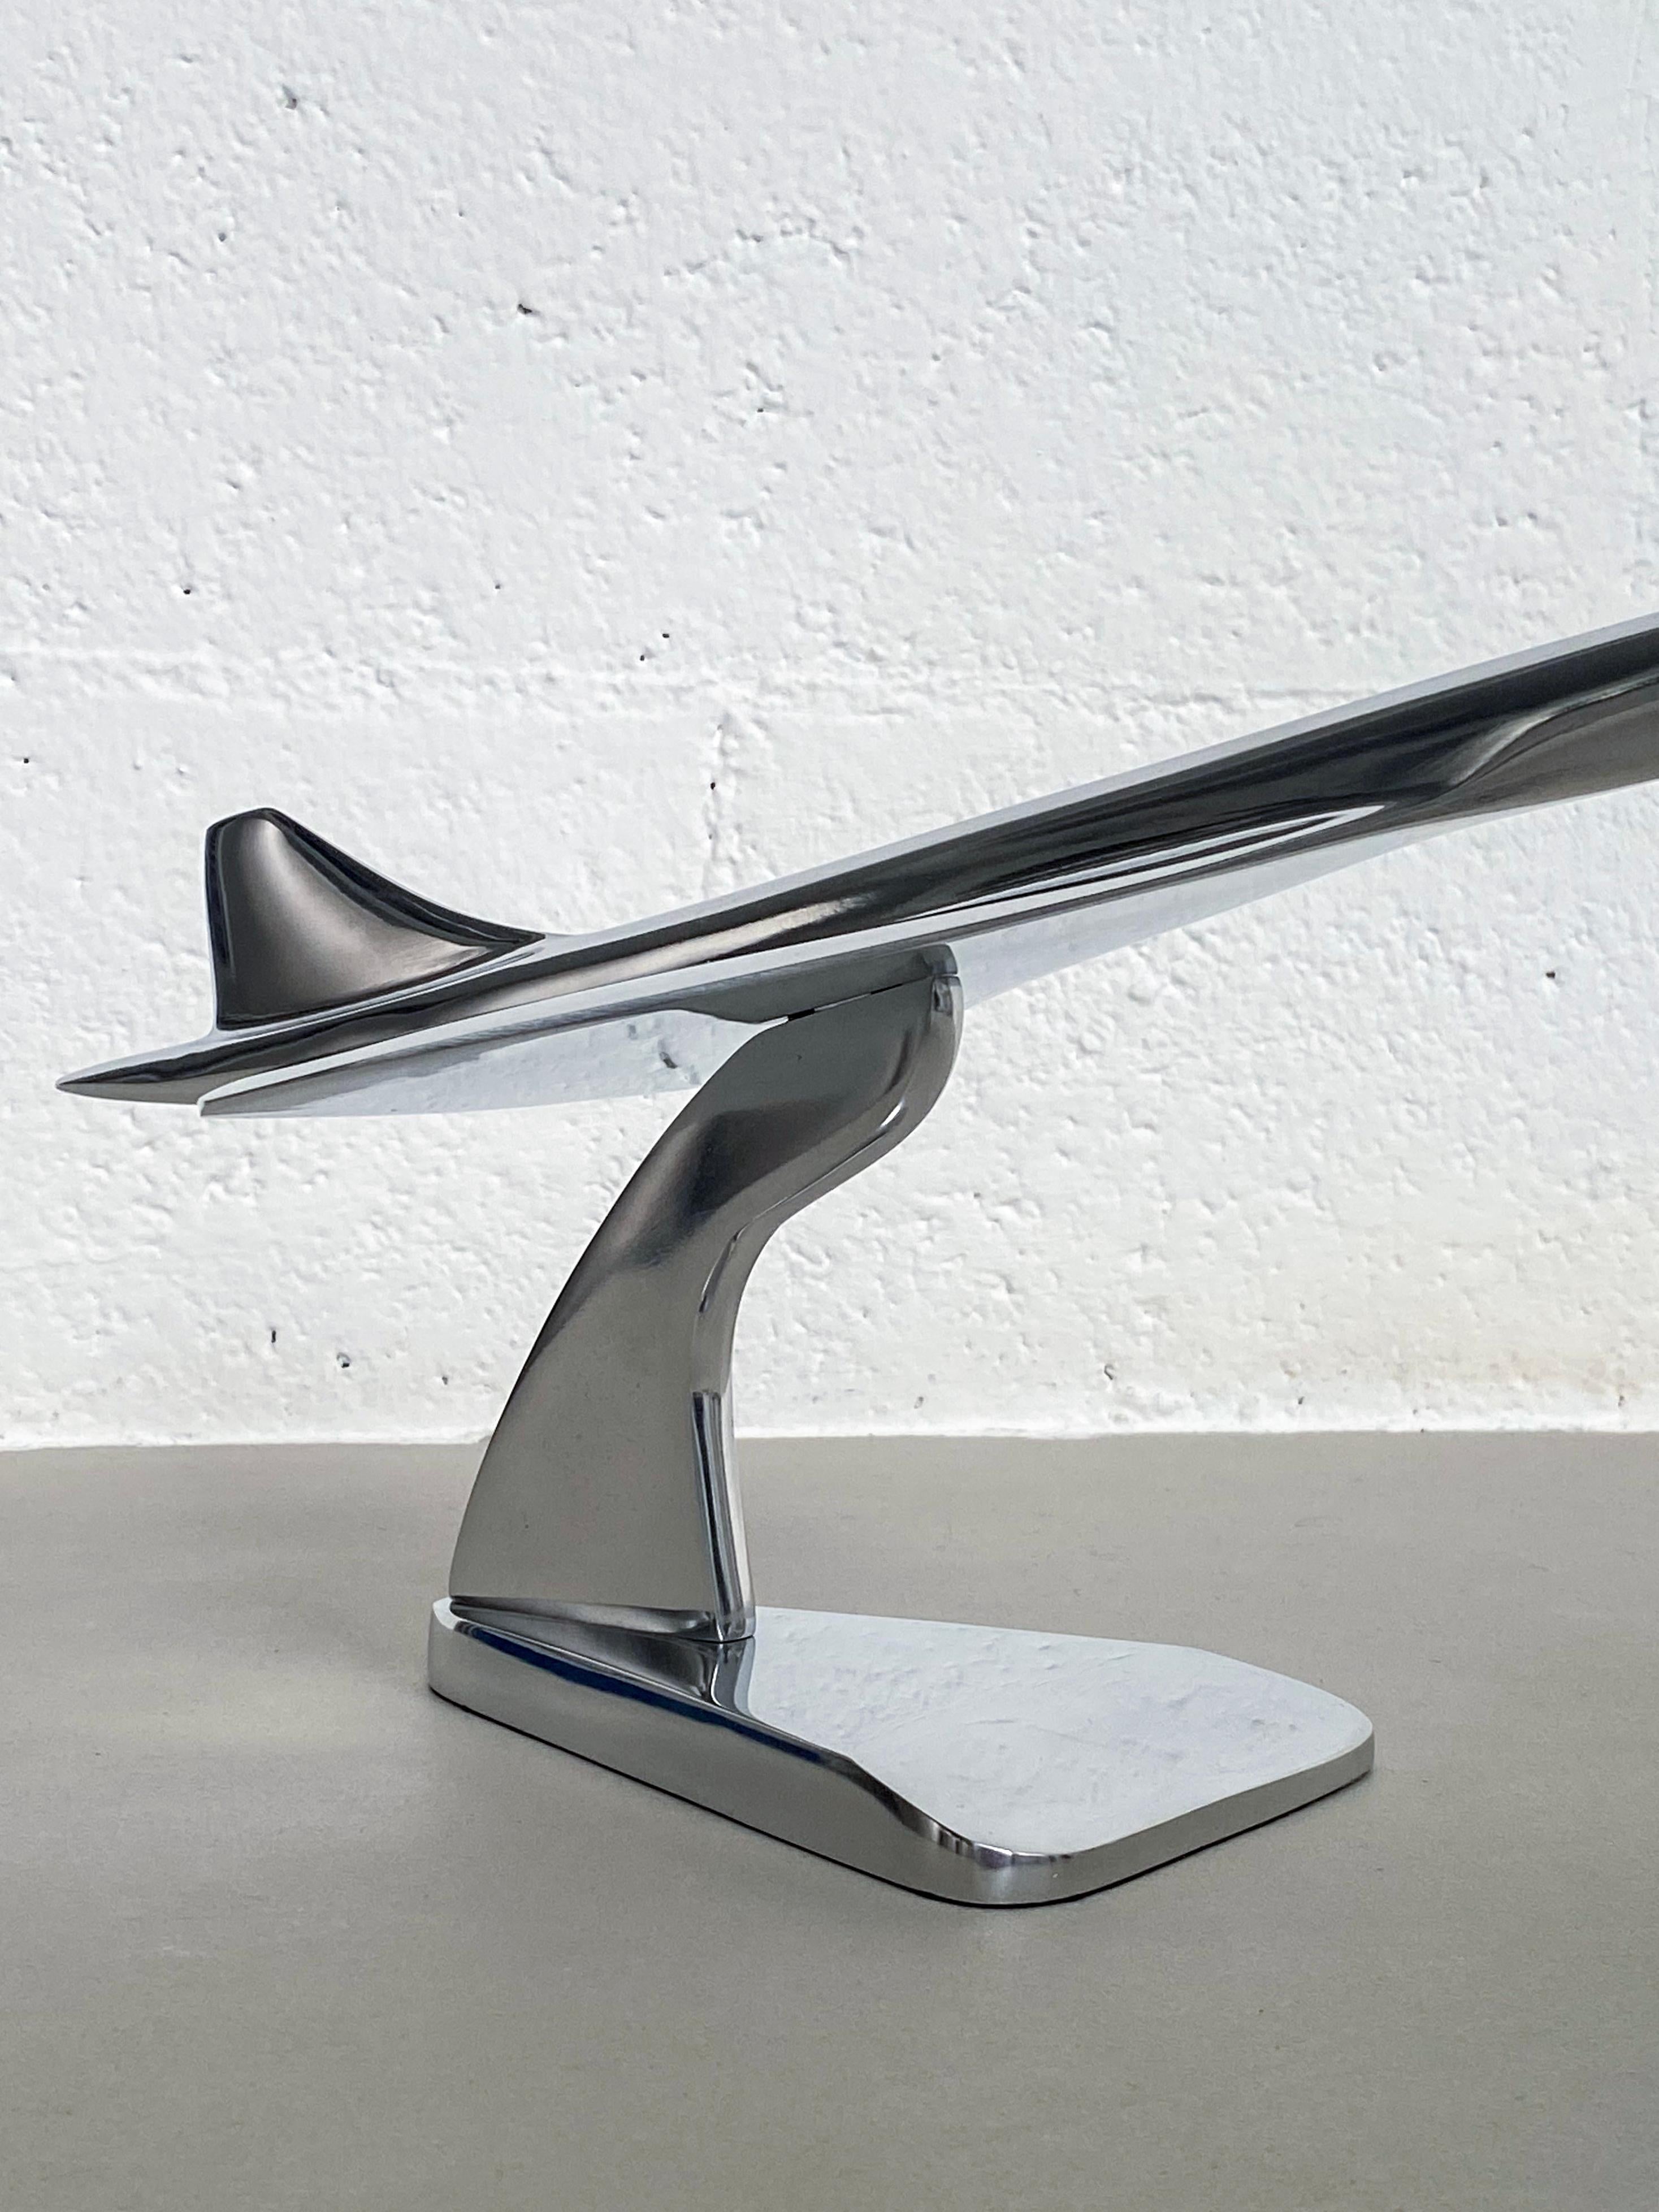 Concorde Supersonic Plane Display Mounted Sculpture in Polished Stainless Steel In Excellent Condition For Sale In Milano, IT